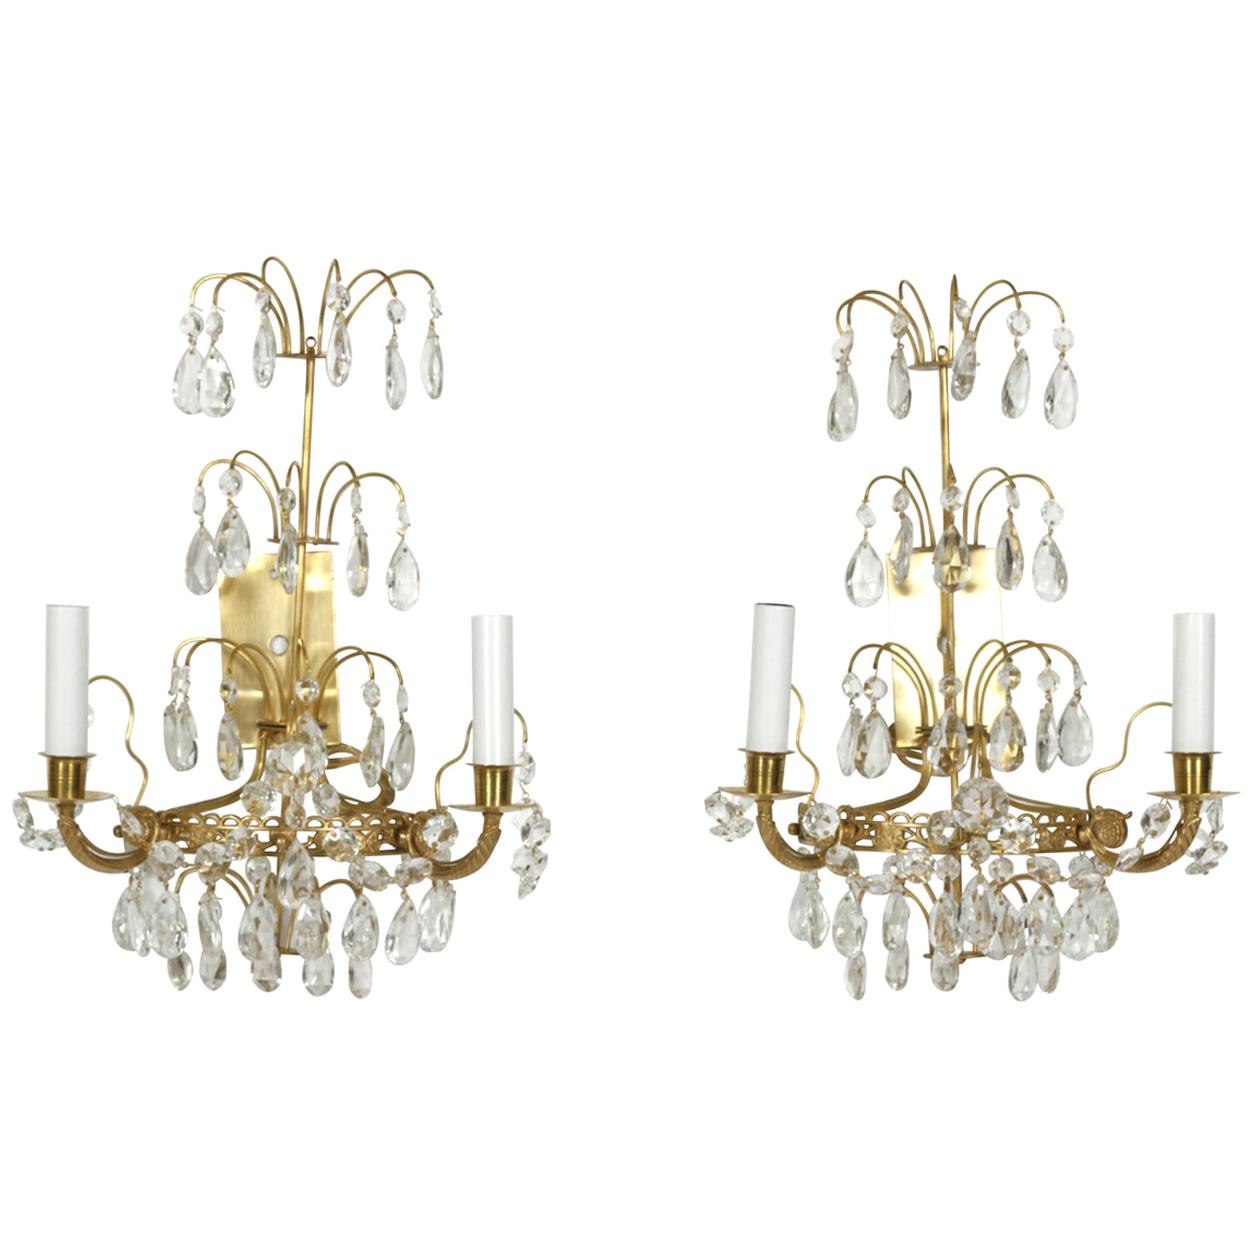 Pair of Swedish Crystal and Brass Sconces